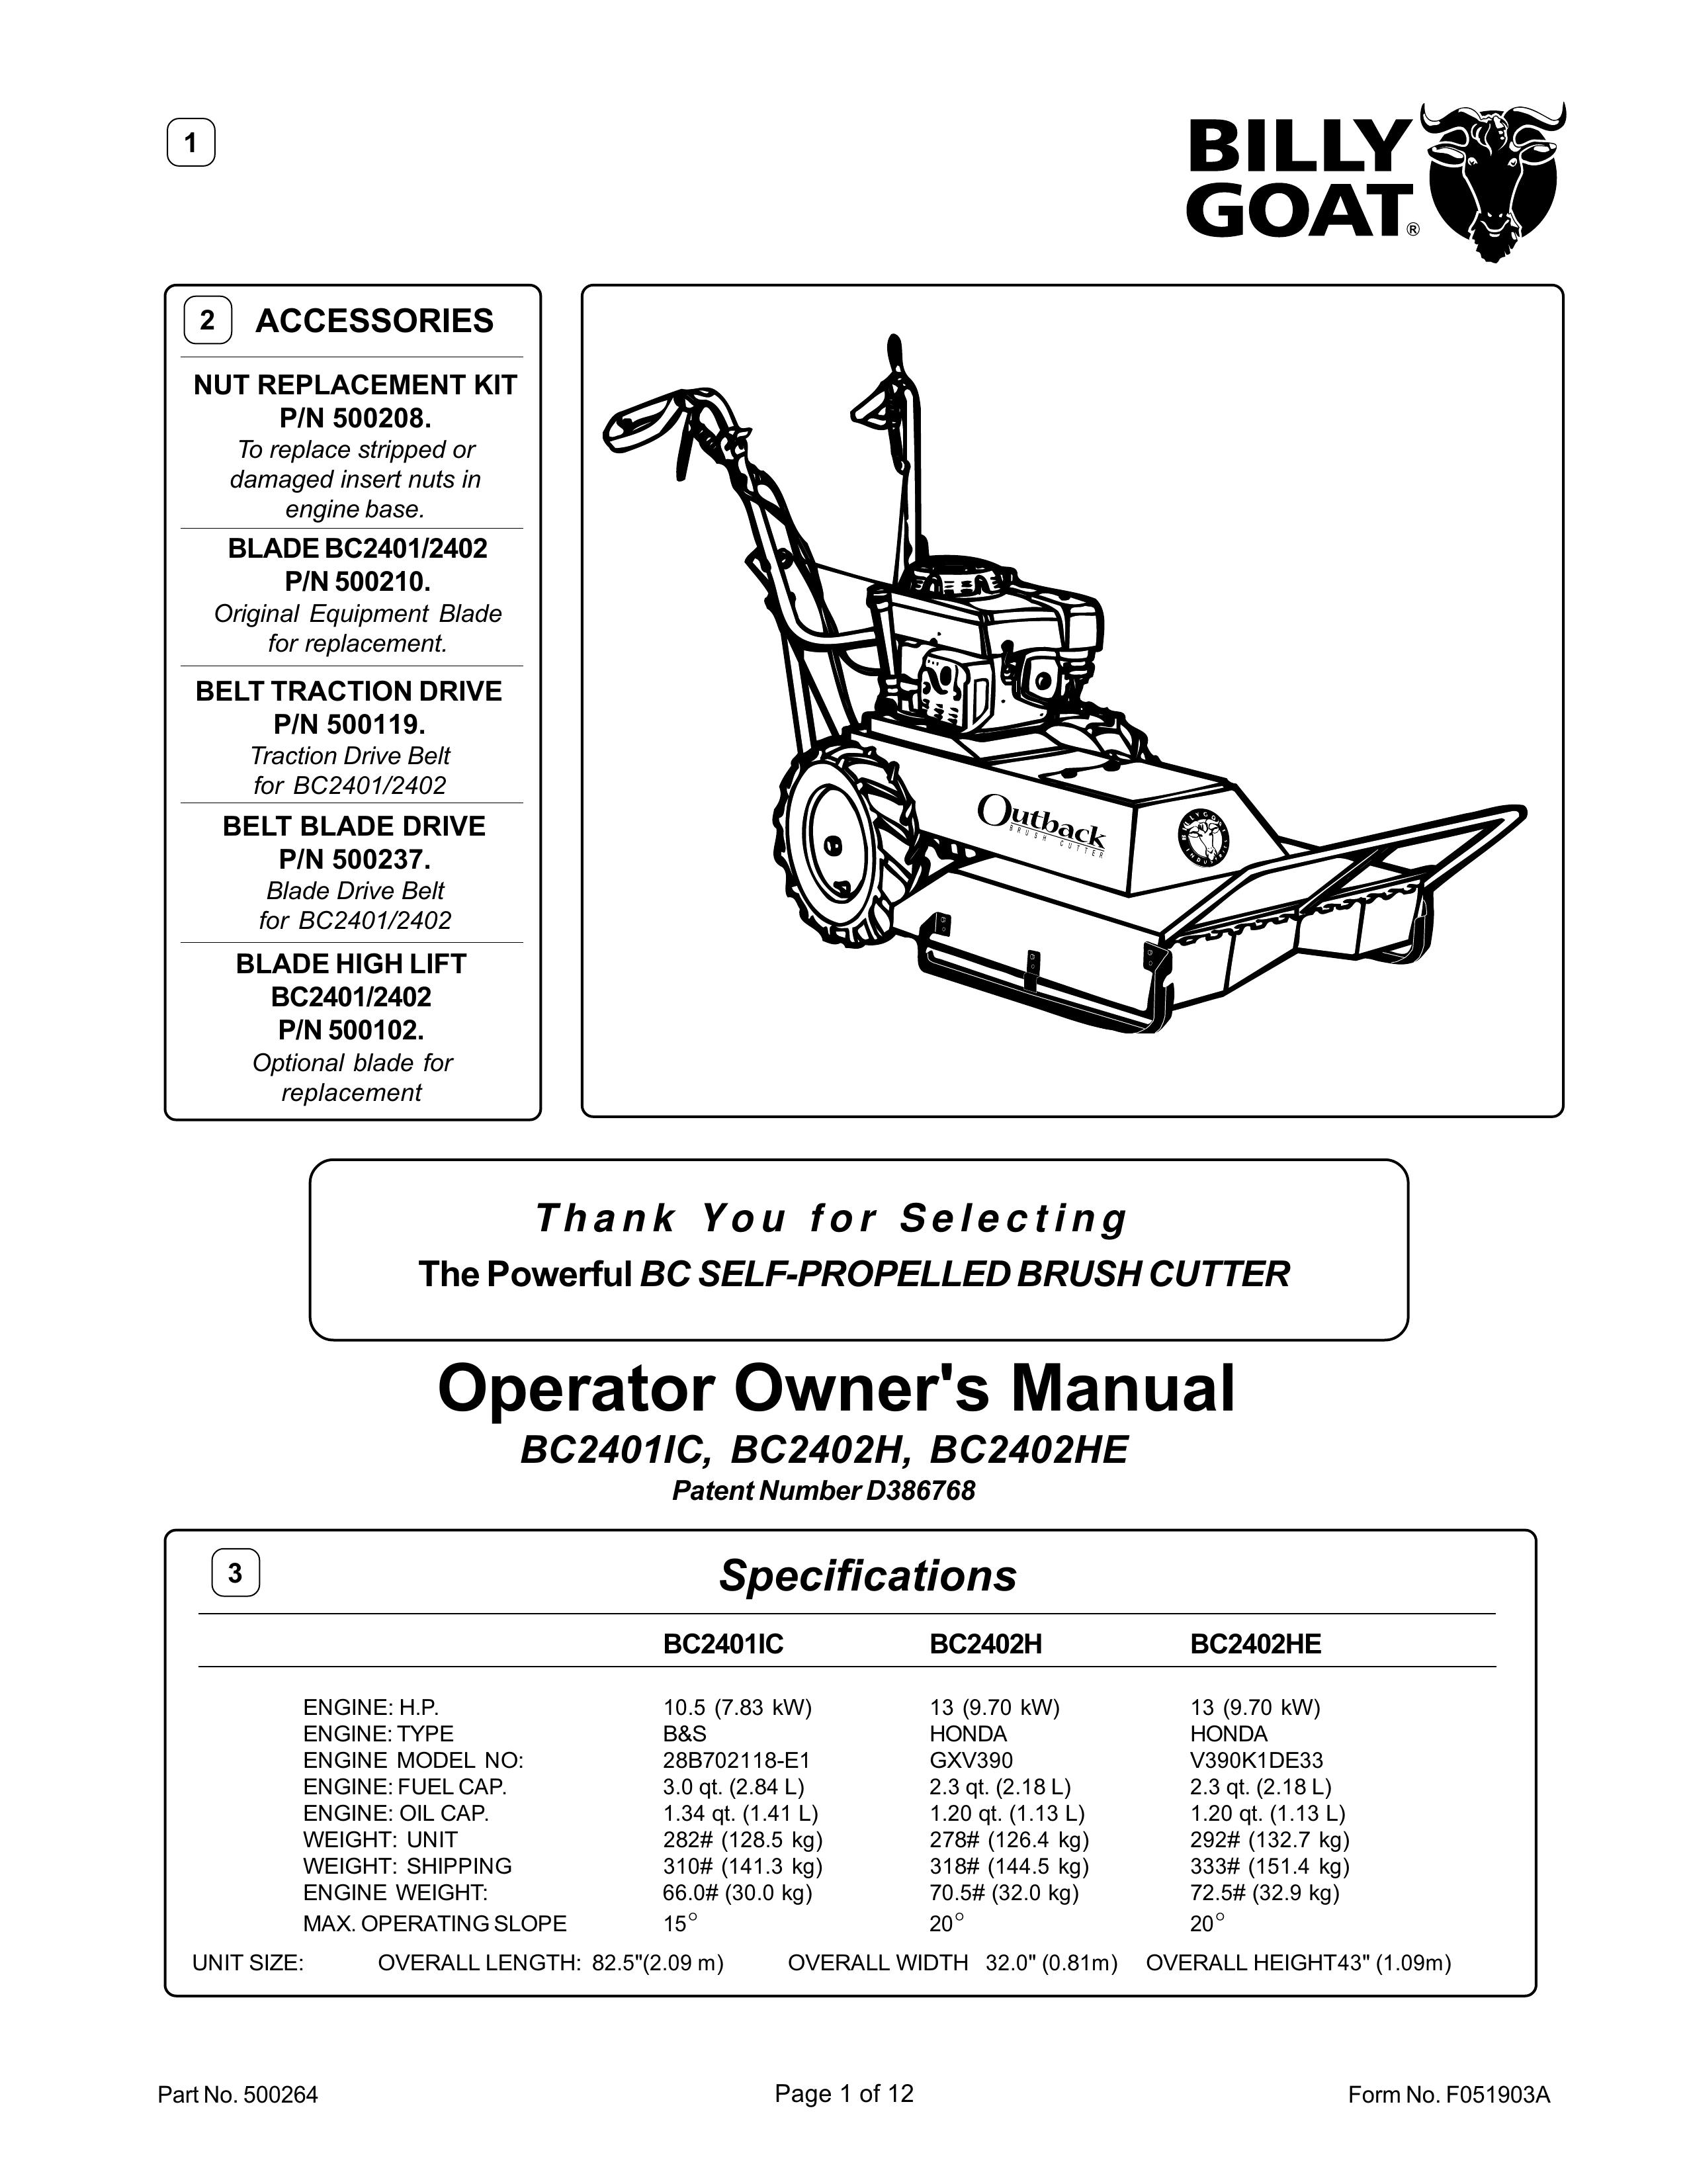 Billy Goat BC2402HE Brush Cutter User Manual